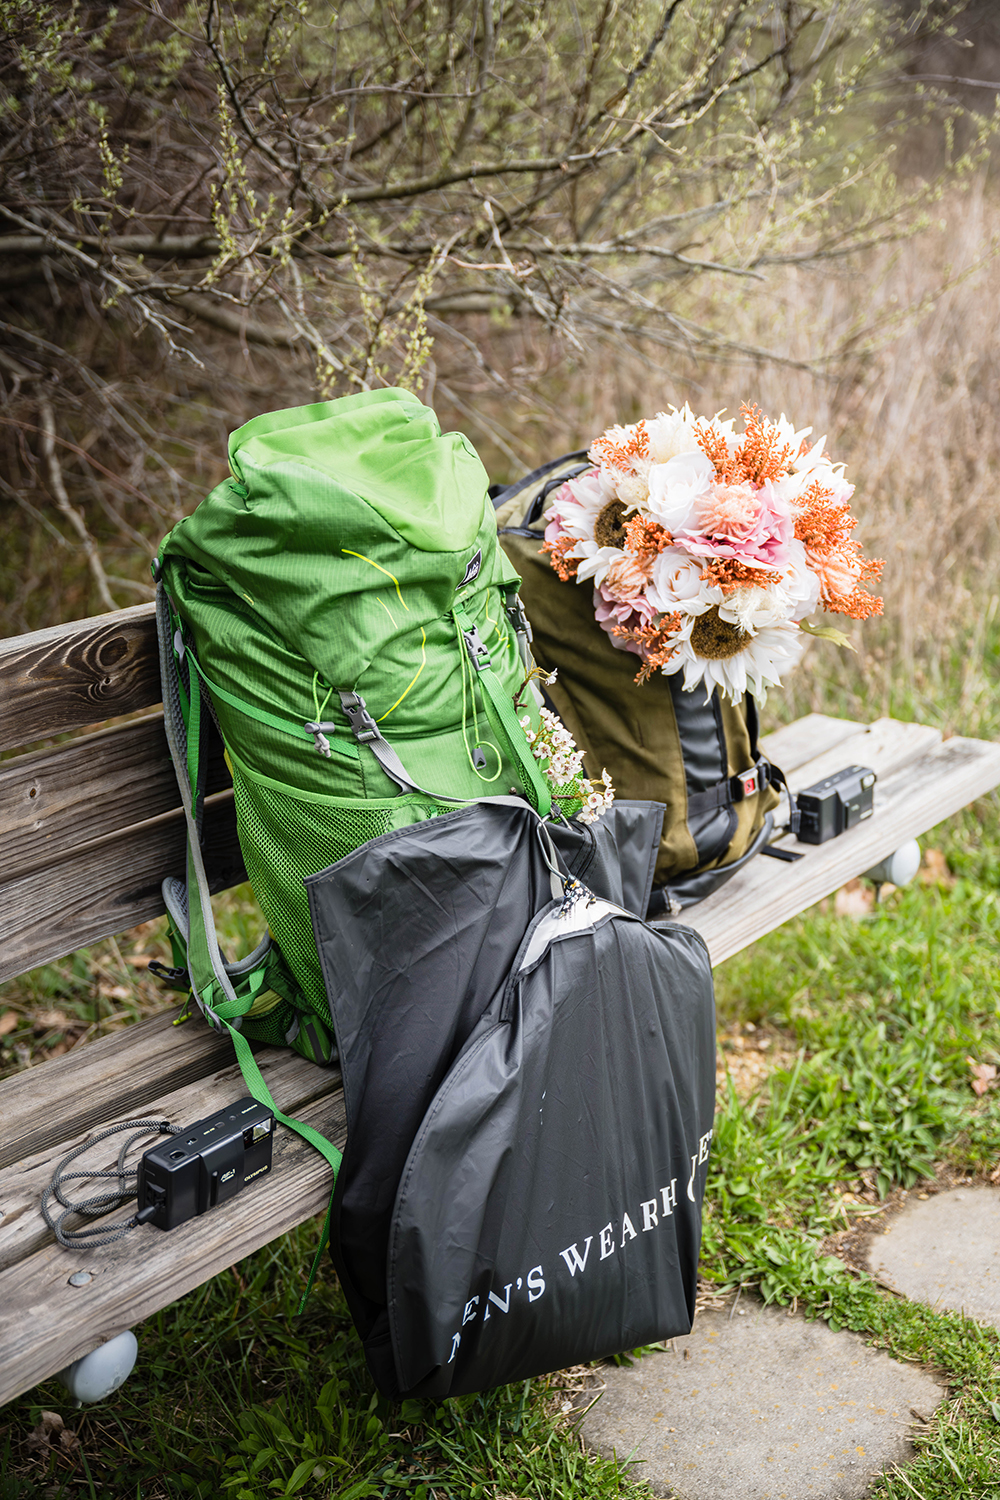 Two film cameras and two hiking backs are set on a bench at Heritage Park. One backpack is a large, green, and has a suit hanging on it while the other is slightly smaller, brown, and is holding a bouquet of fake flowers.